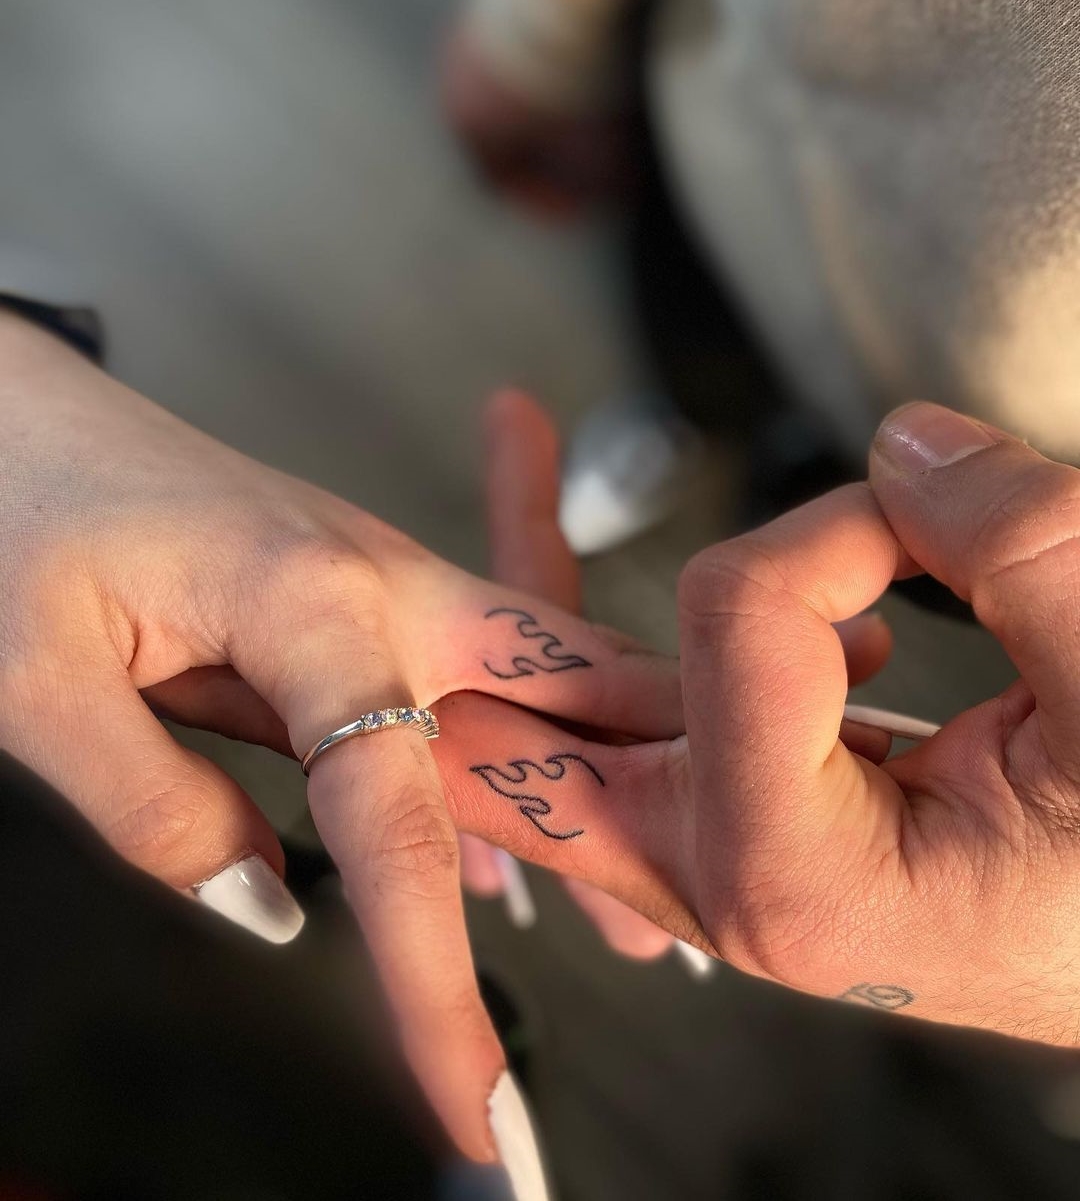 Matching Flame Tattoos Inside Middle Fingers